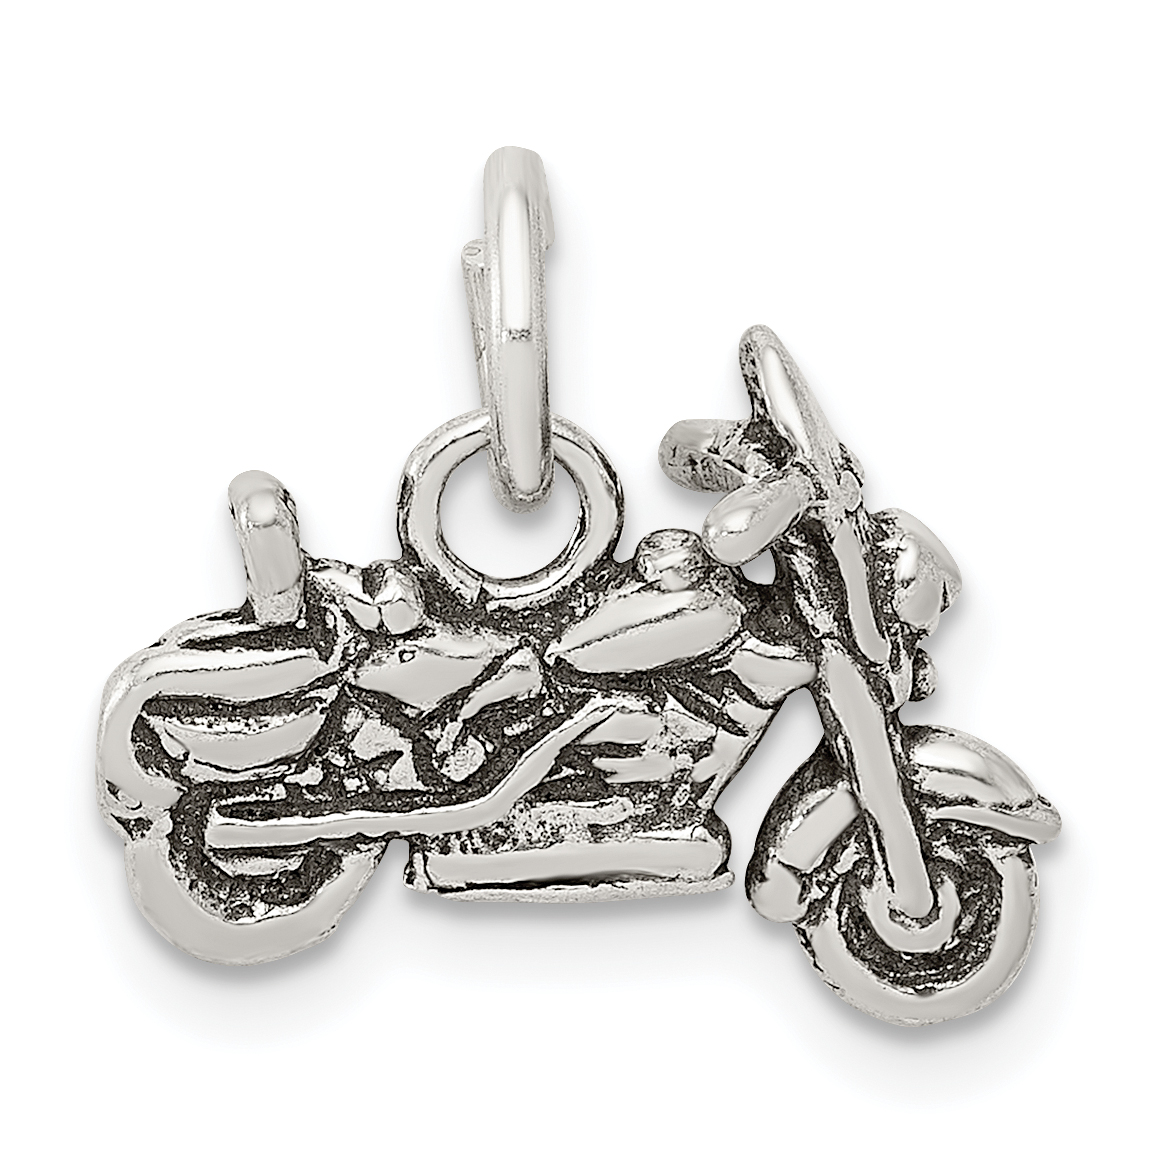 Core Silver Sterling Silver Antiqued Motorcycle Charm